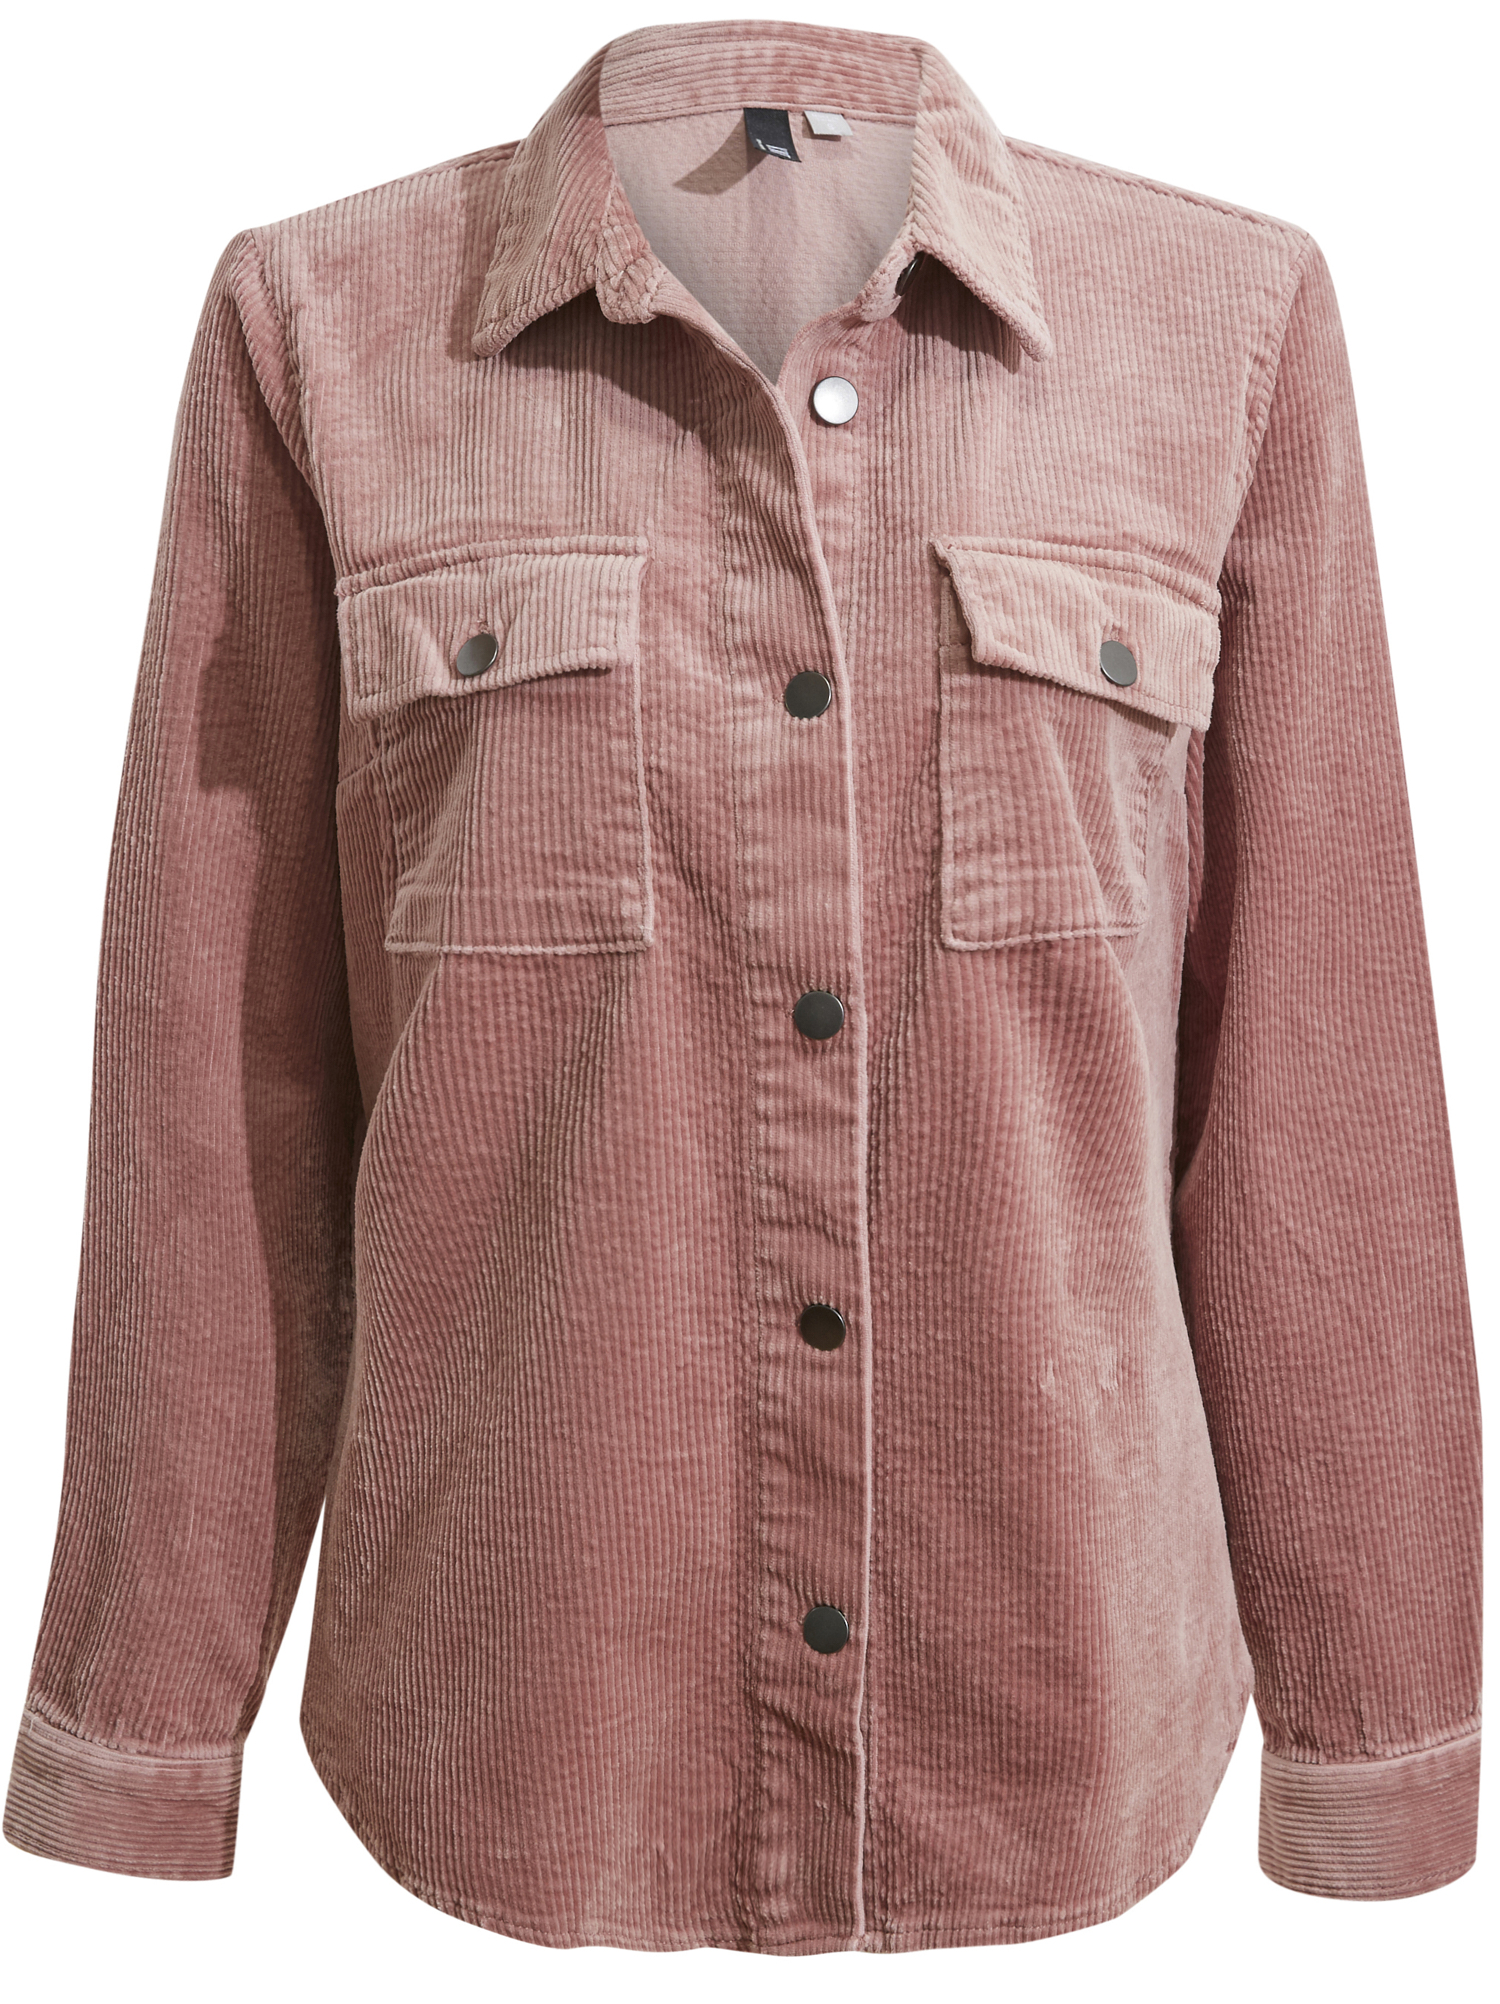 KUT from the Kloth Button Down Shirt